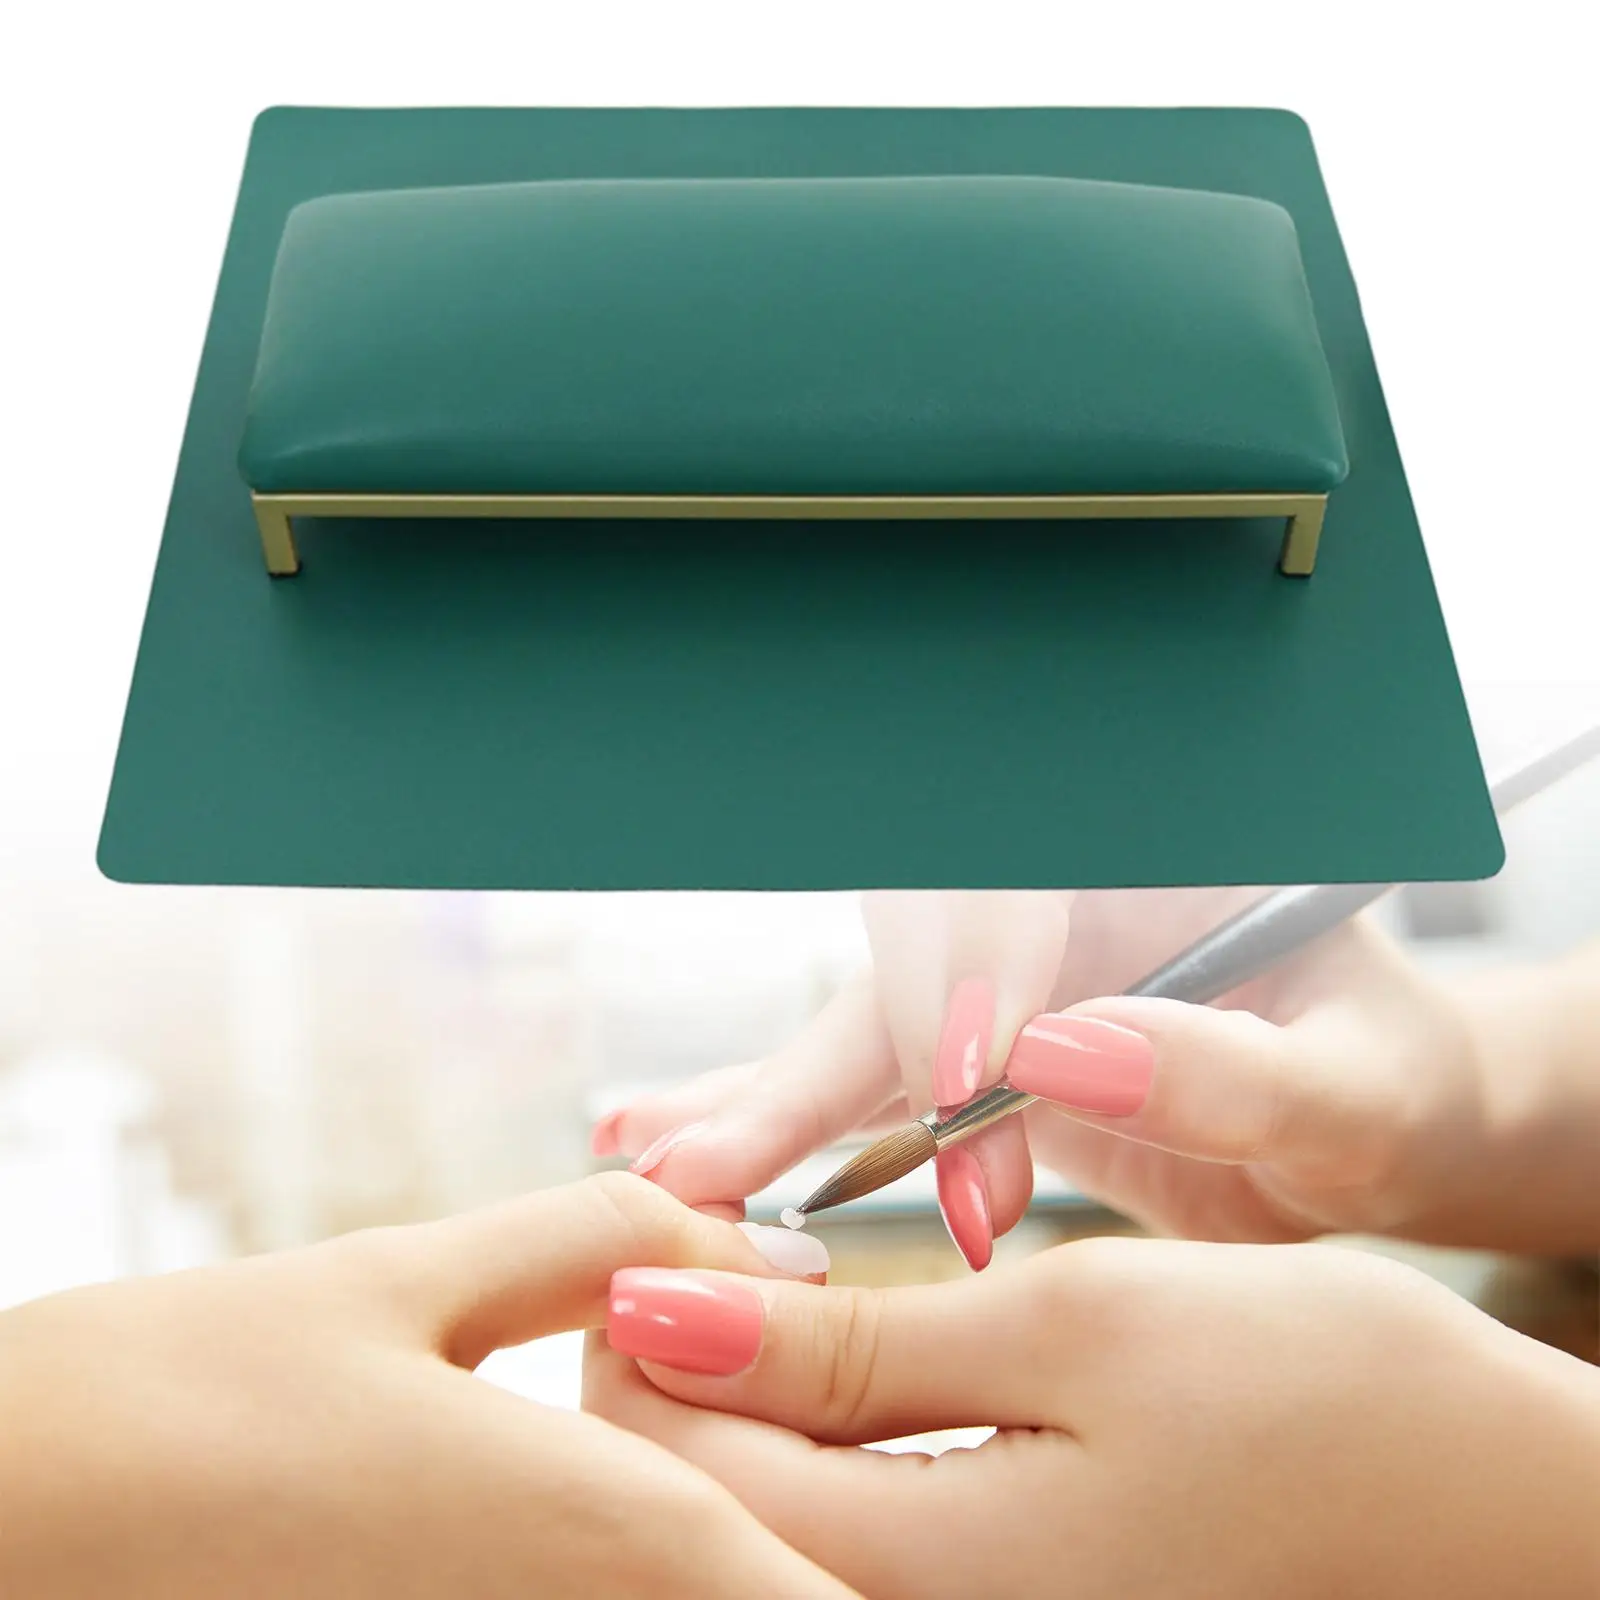 Nail Art Hand Pillow Non Slip Desktop Accessory Metal PU Leather Arm Rest for Nails for Salon Home Manicurist Nail Techs Use Arm